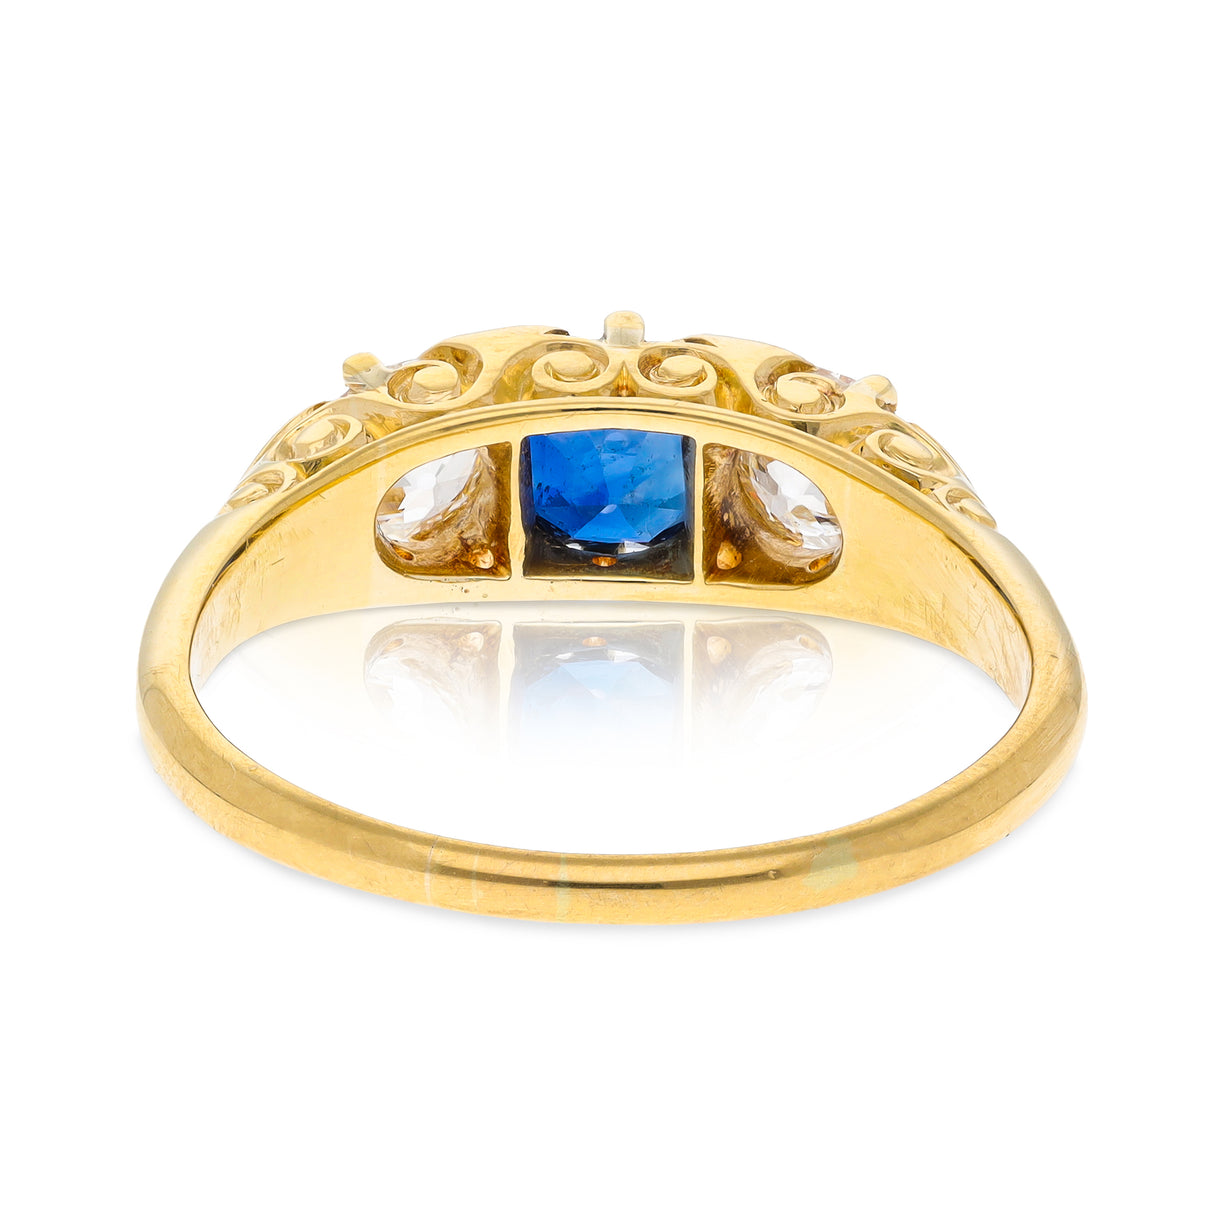 Antique, Edwardian, Sapphire and Diamond, Carved Three Stone Engagement Ring, 18ct Yellow Gold